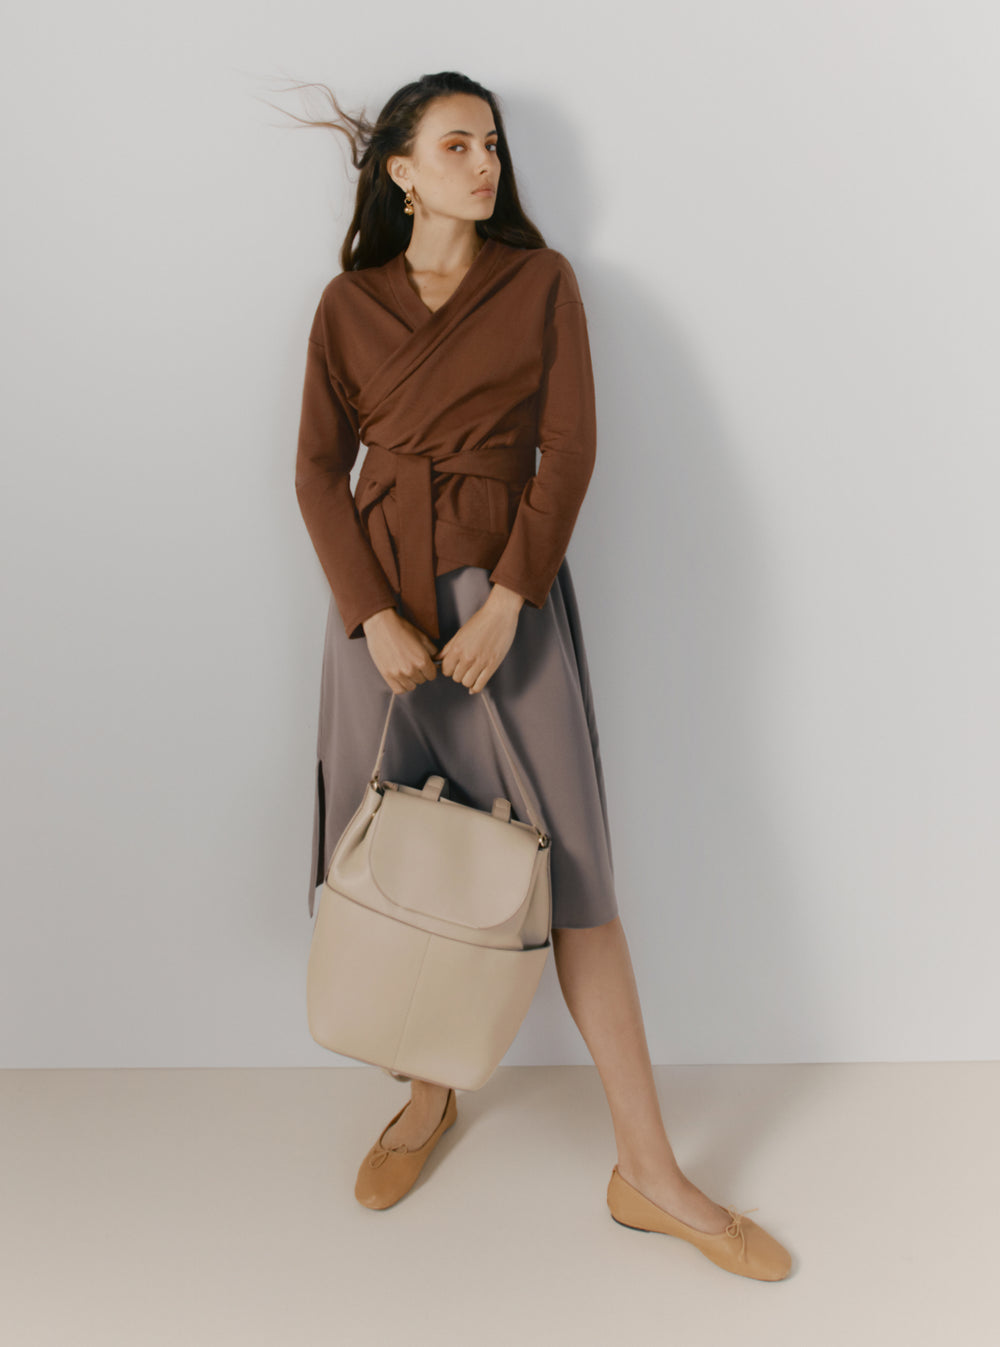 Woman in a wrap top and skirt holding a handbag and looking away.